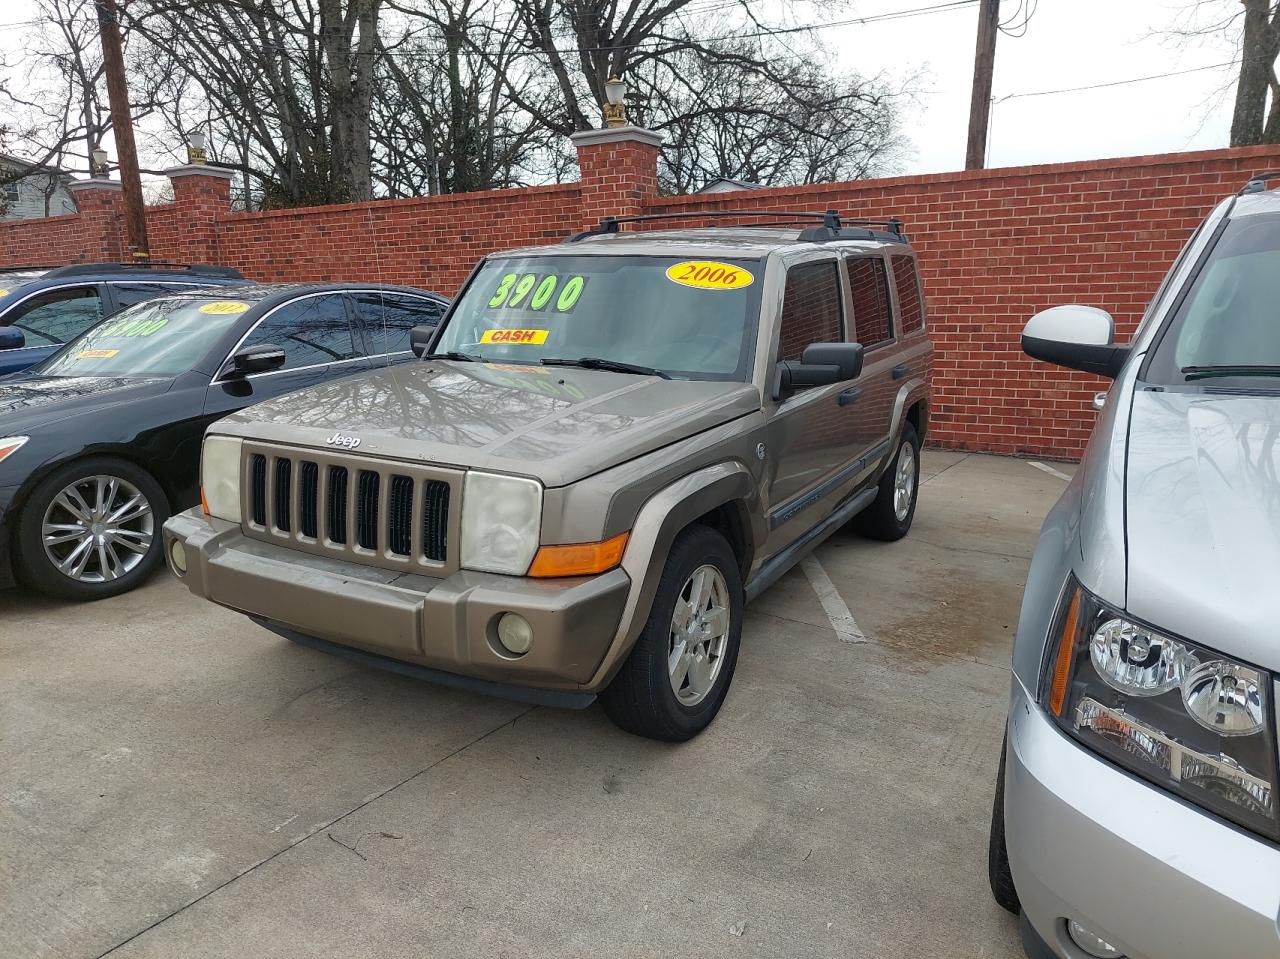 2006 JEEP COMMANDER VIN 1J8HG48N66C232317 from the USA